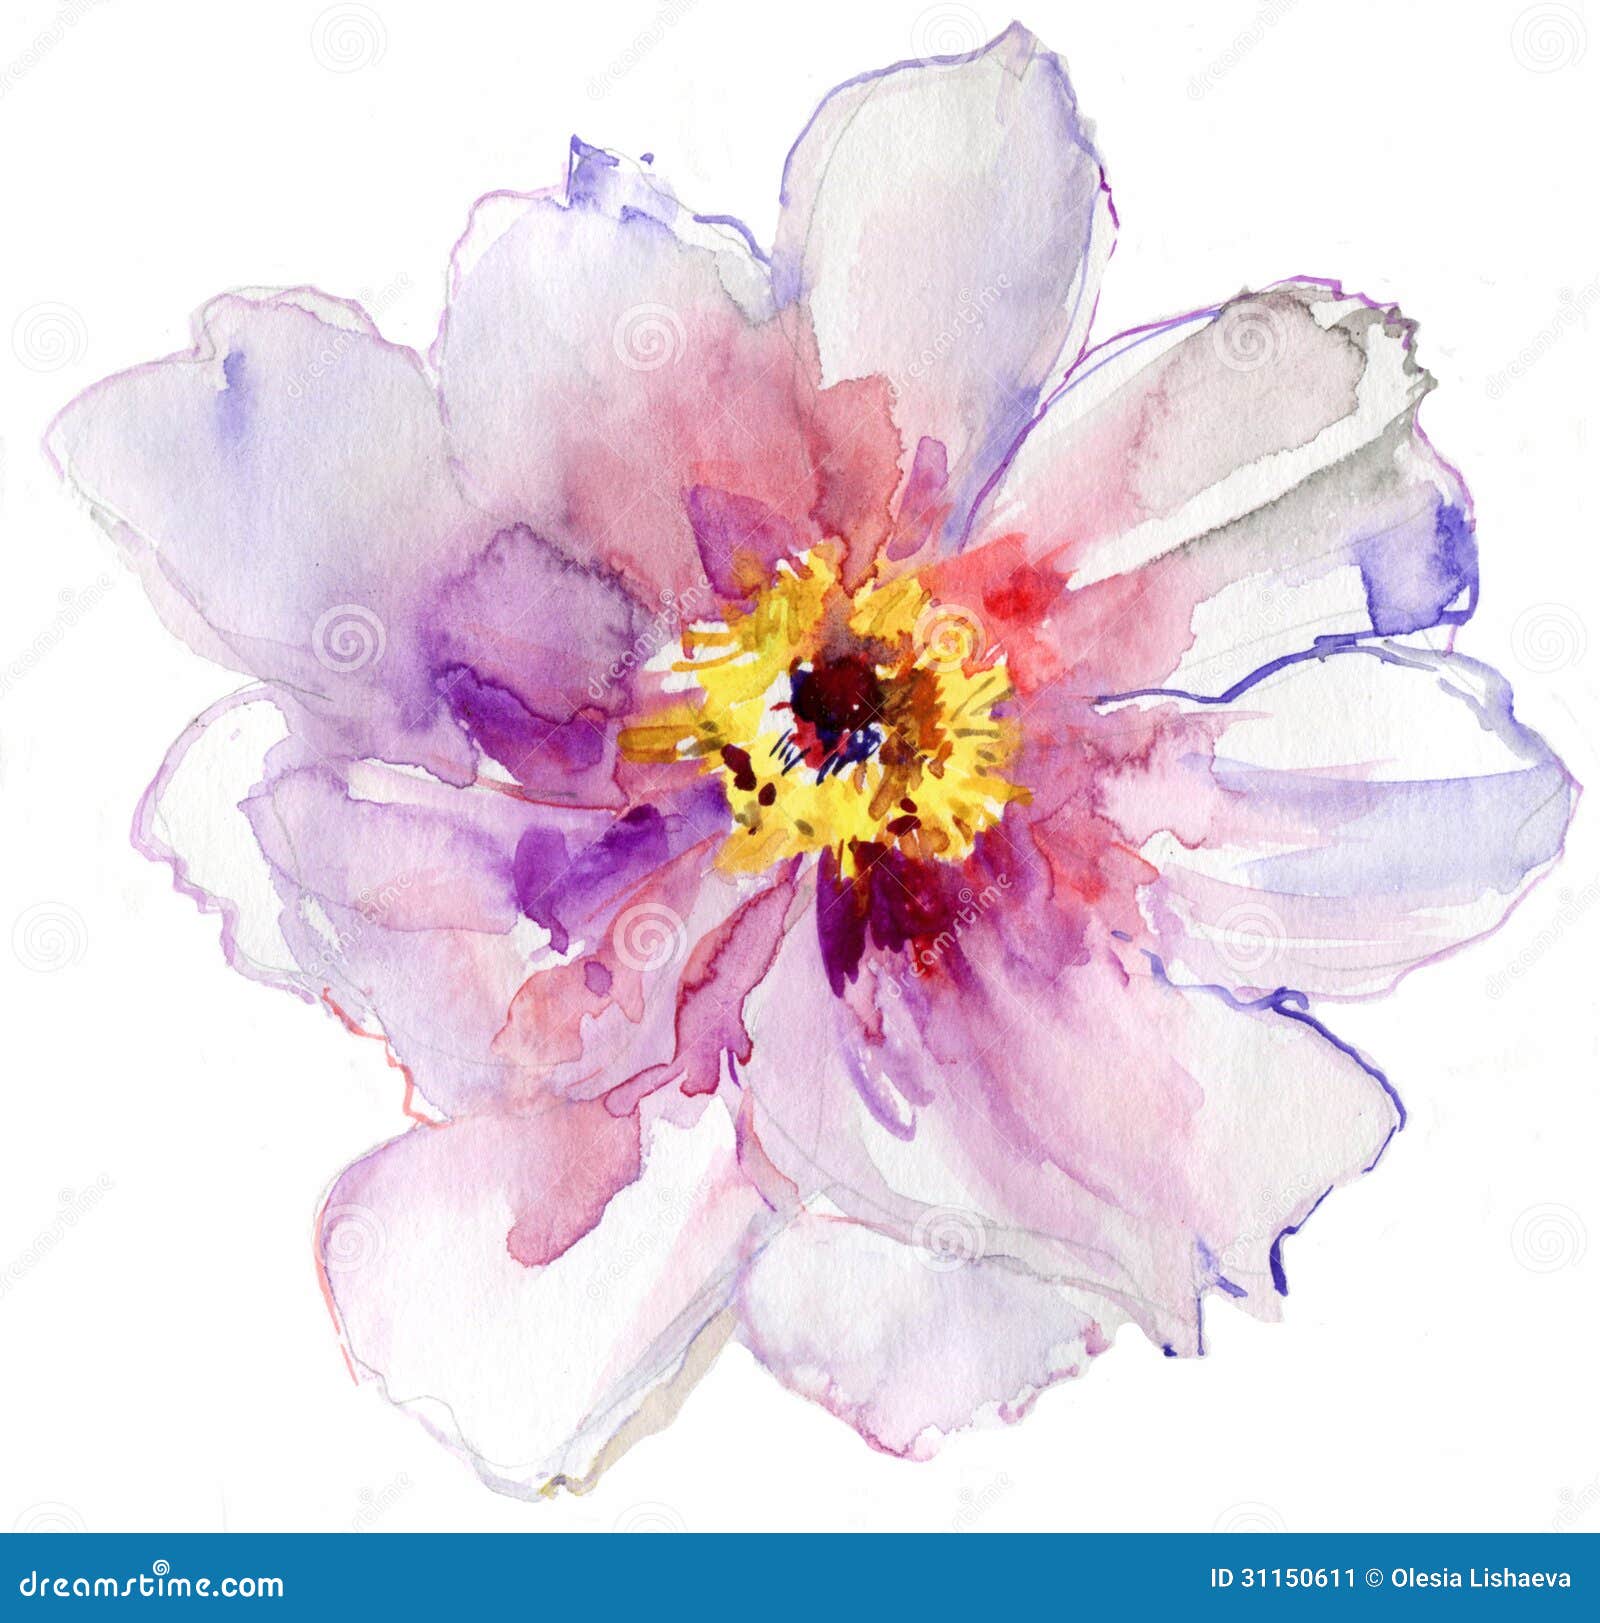 read themes tumblr easy to Flower Stock 31150611 Watercolor  Image White Image: